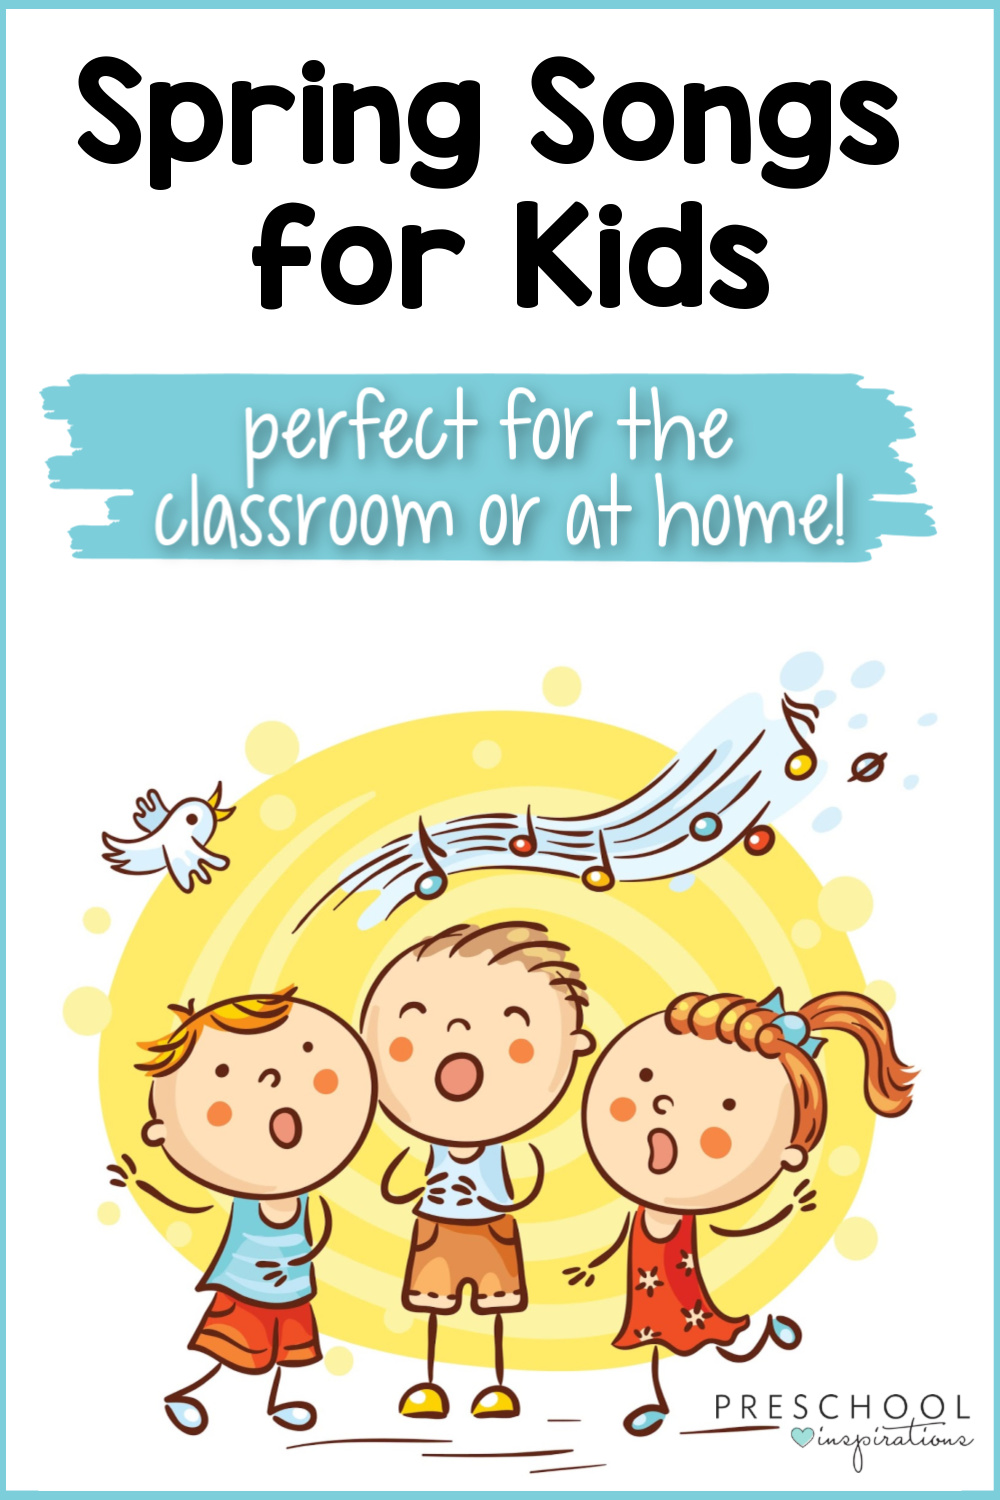 Great songs for kids with a springtime theme! Dance songs, fingerplays, chants and more that are all about rainbows, butterflies, and all things spring! You kids will love them, both at school and at home.